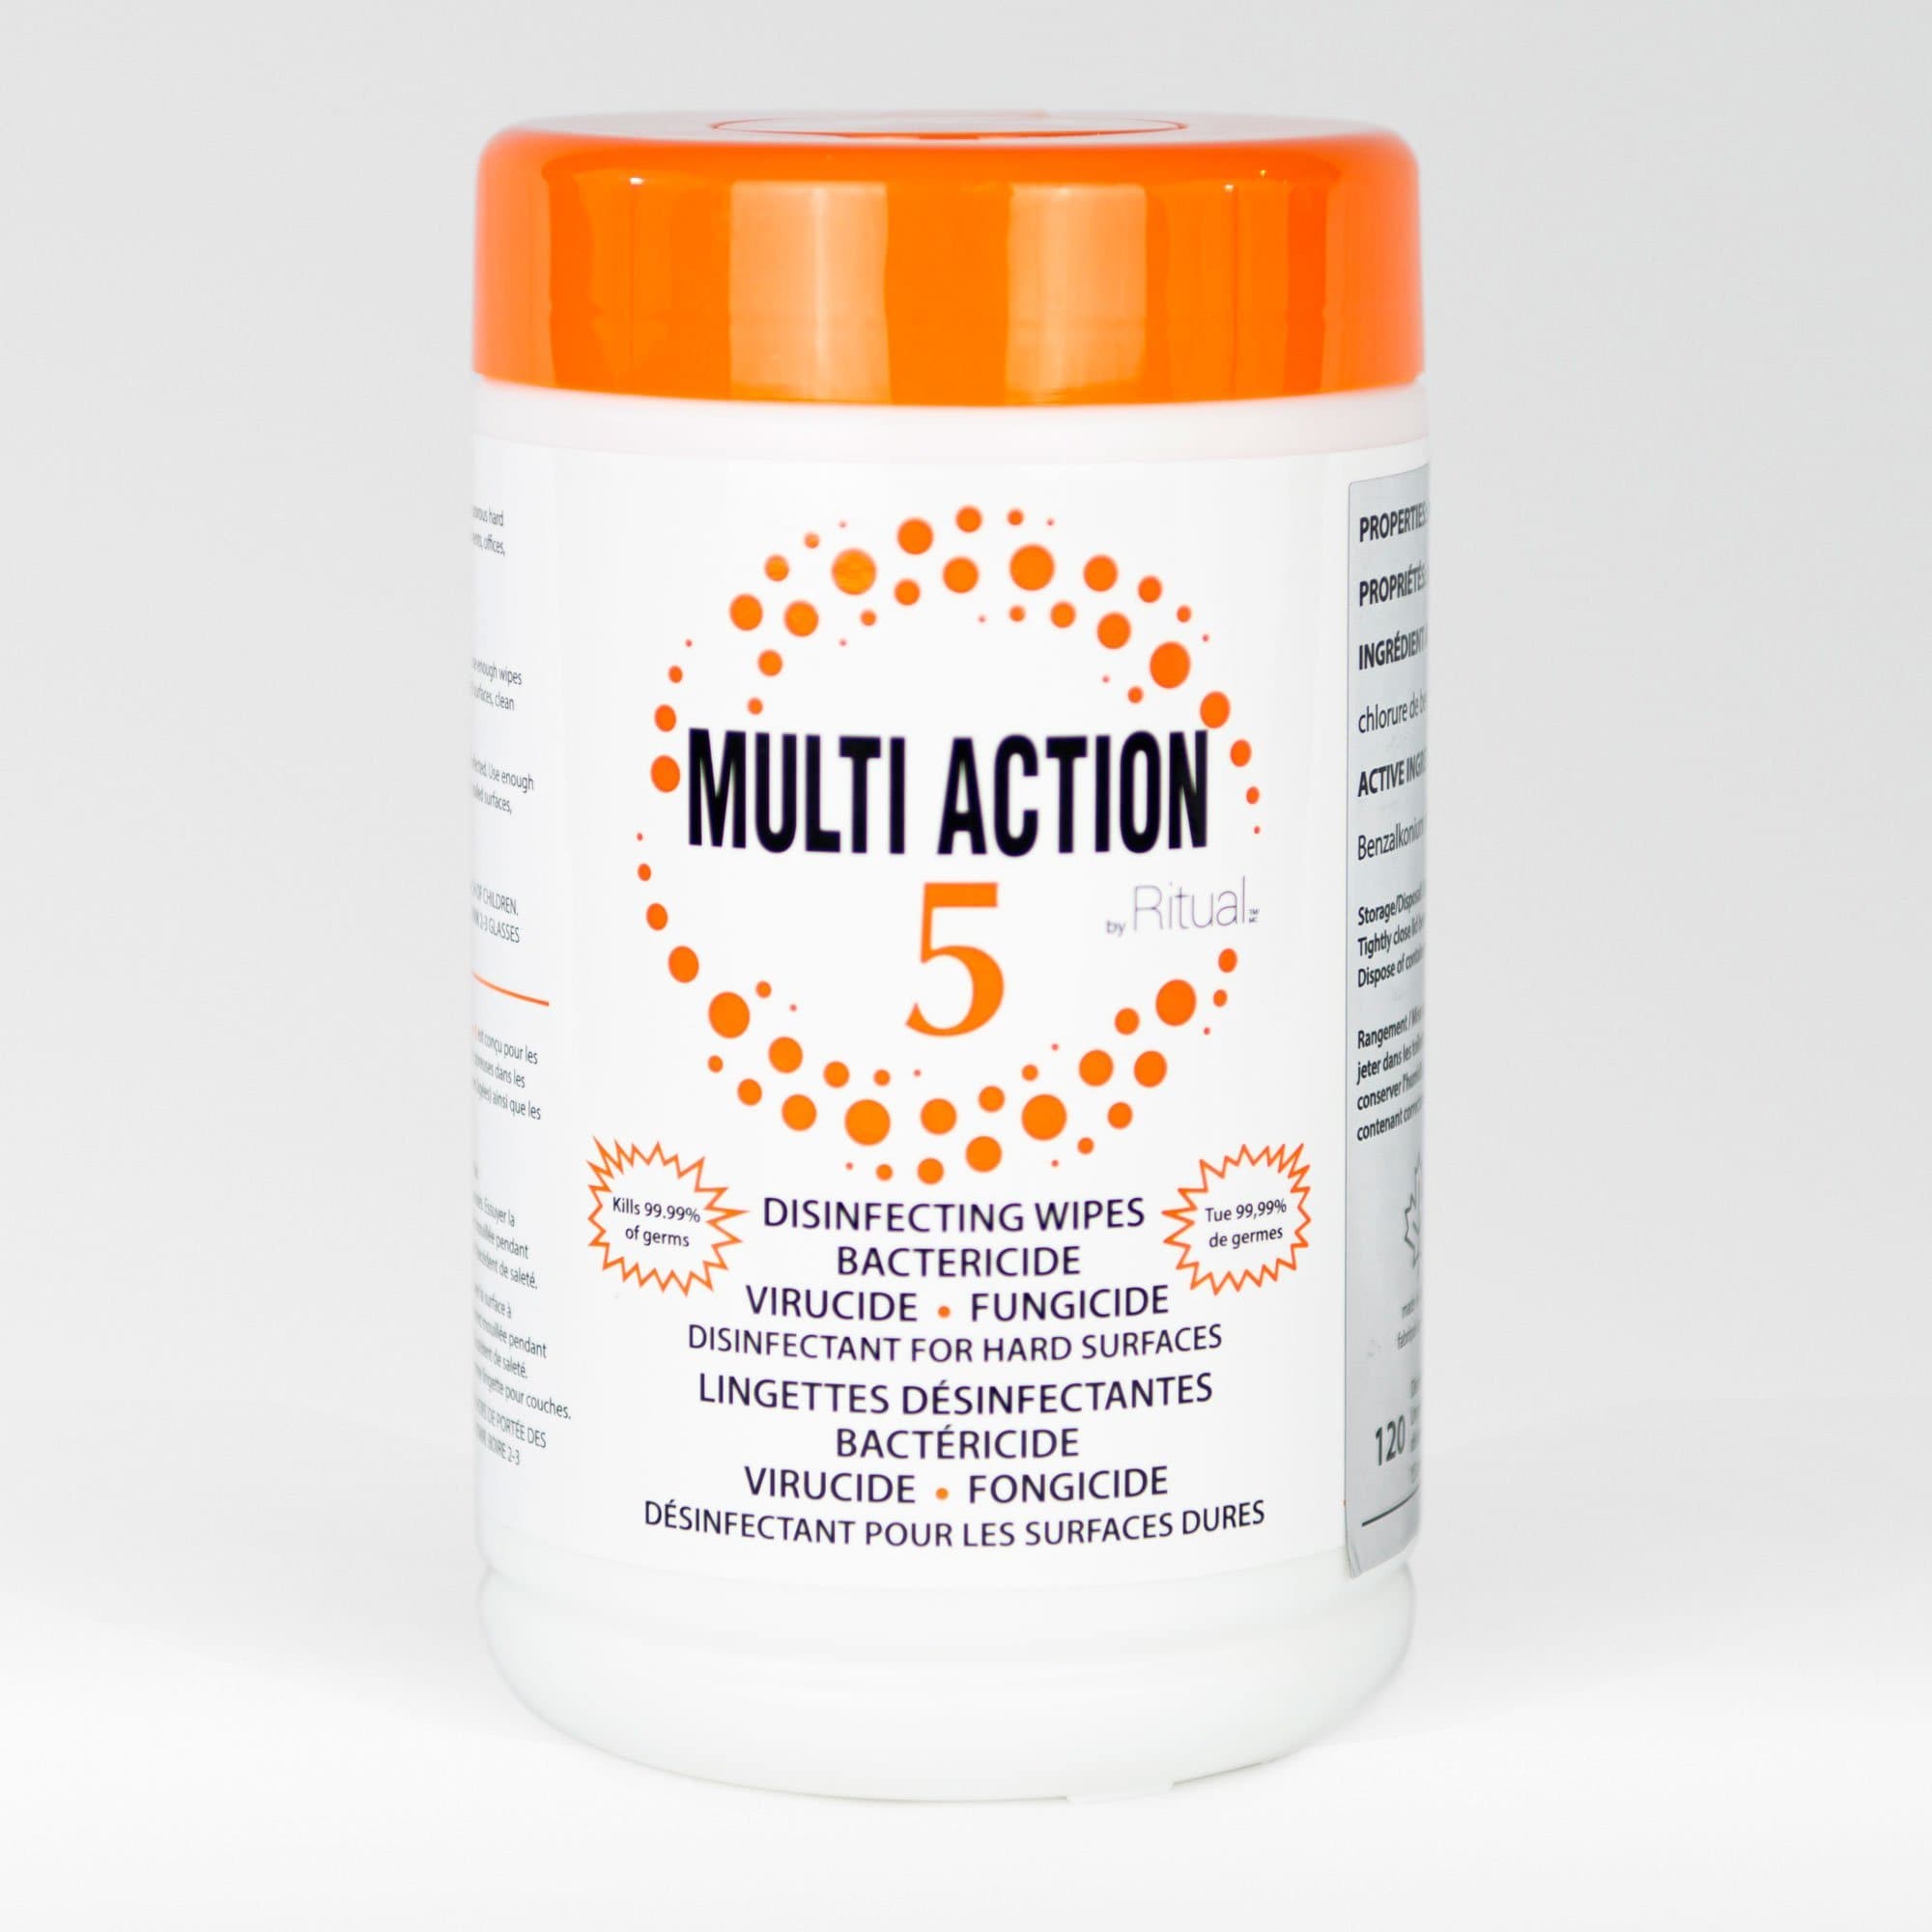 Ritual Multi Action 5 Disinfecting Wipes (120 wipes) - Safetmed